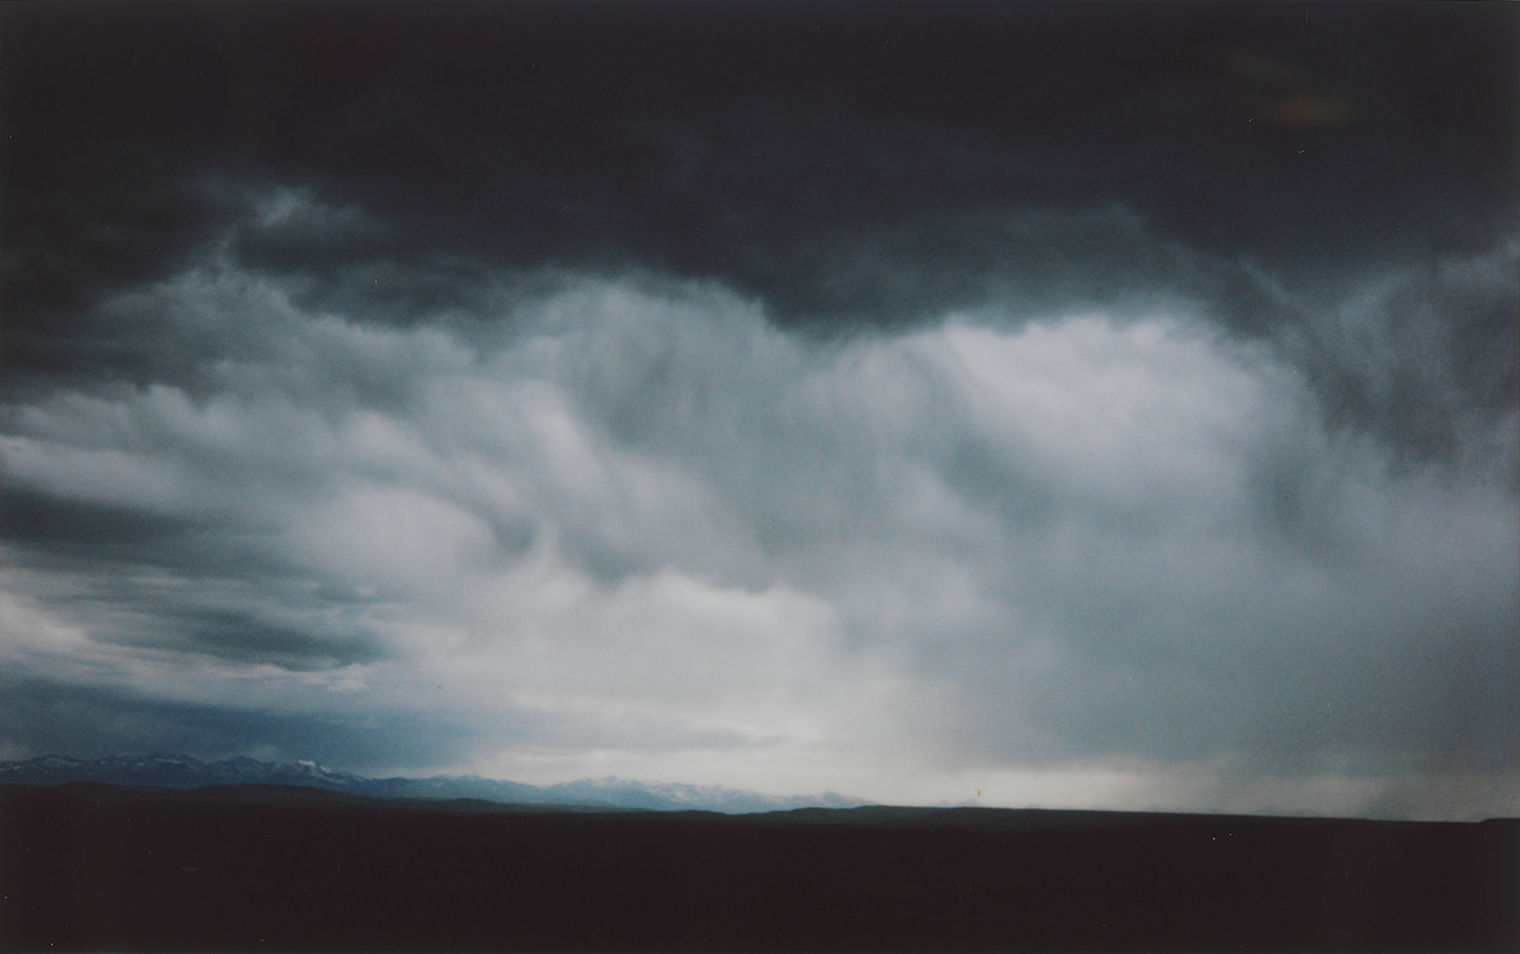 Landscape photograph. Dark blue, stormy clouds give way to hazier gray clouds. In the distance, snow-capped, blue mountains. The ground throughout the shot is dark gray.